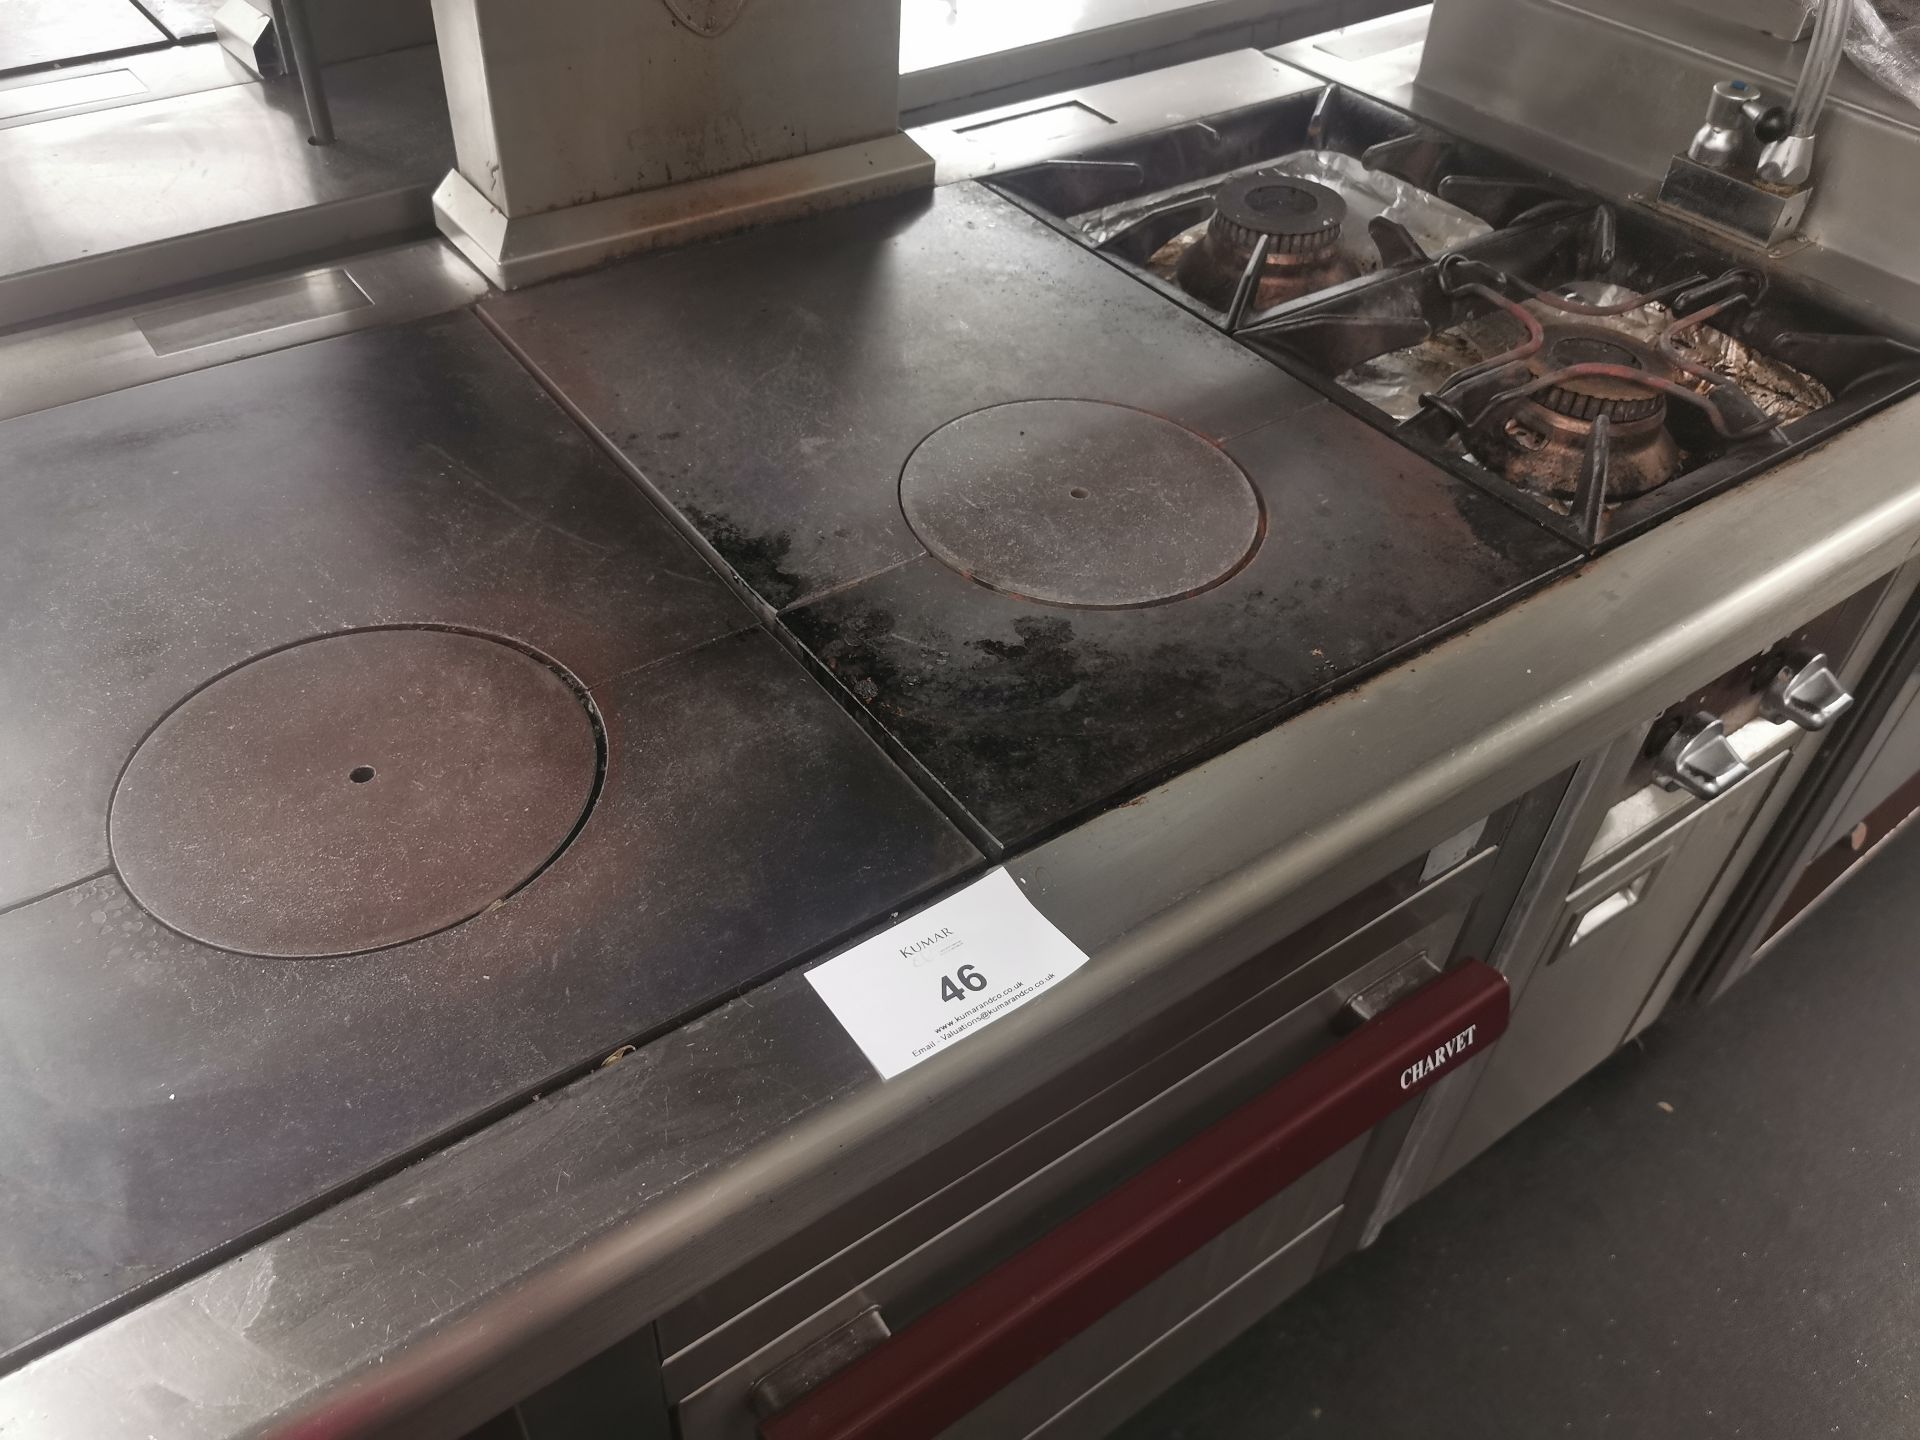 Charvet pro series hot plate oven and hob W 127cm - Image 4 of 5